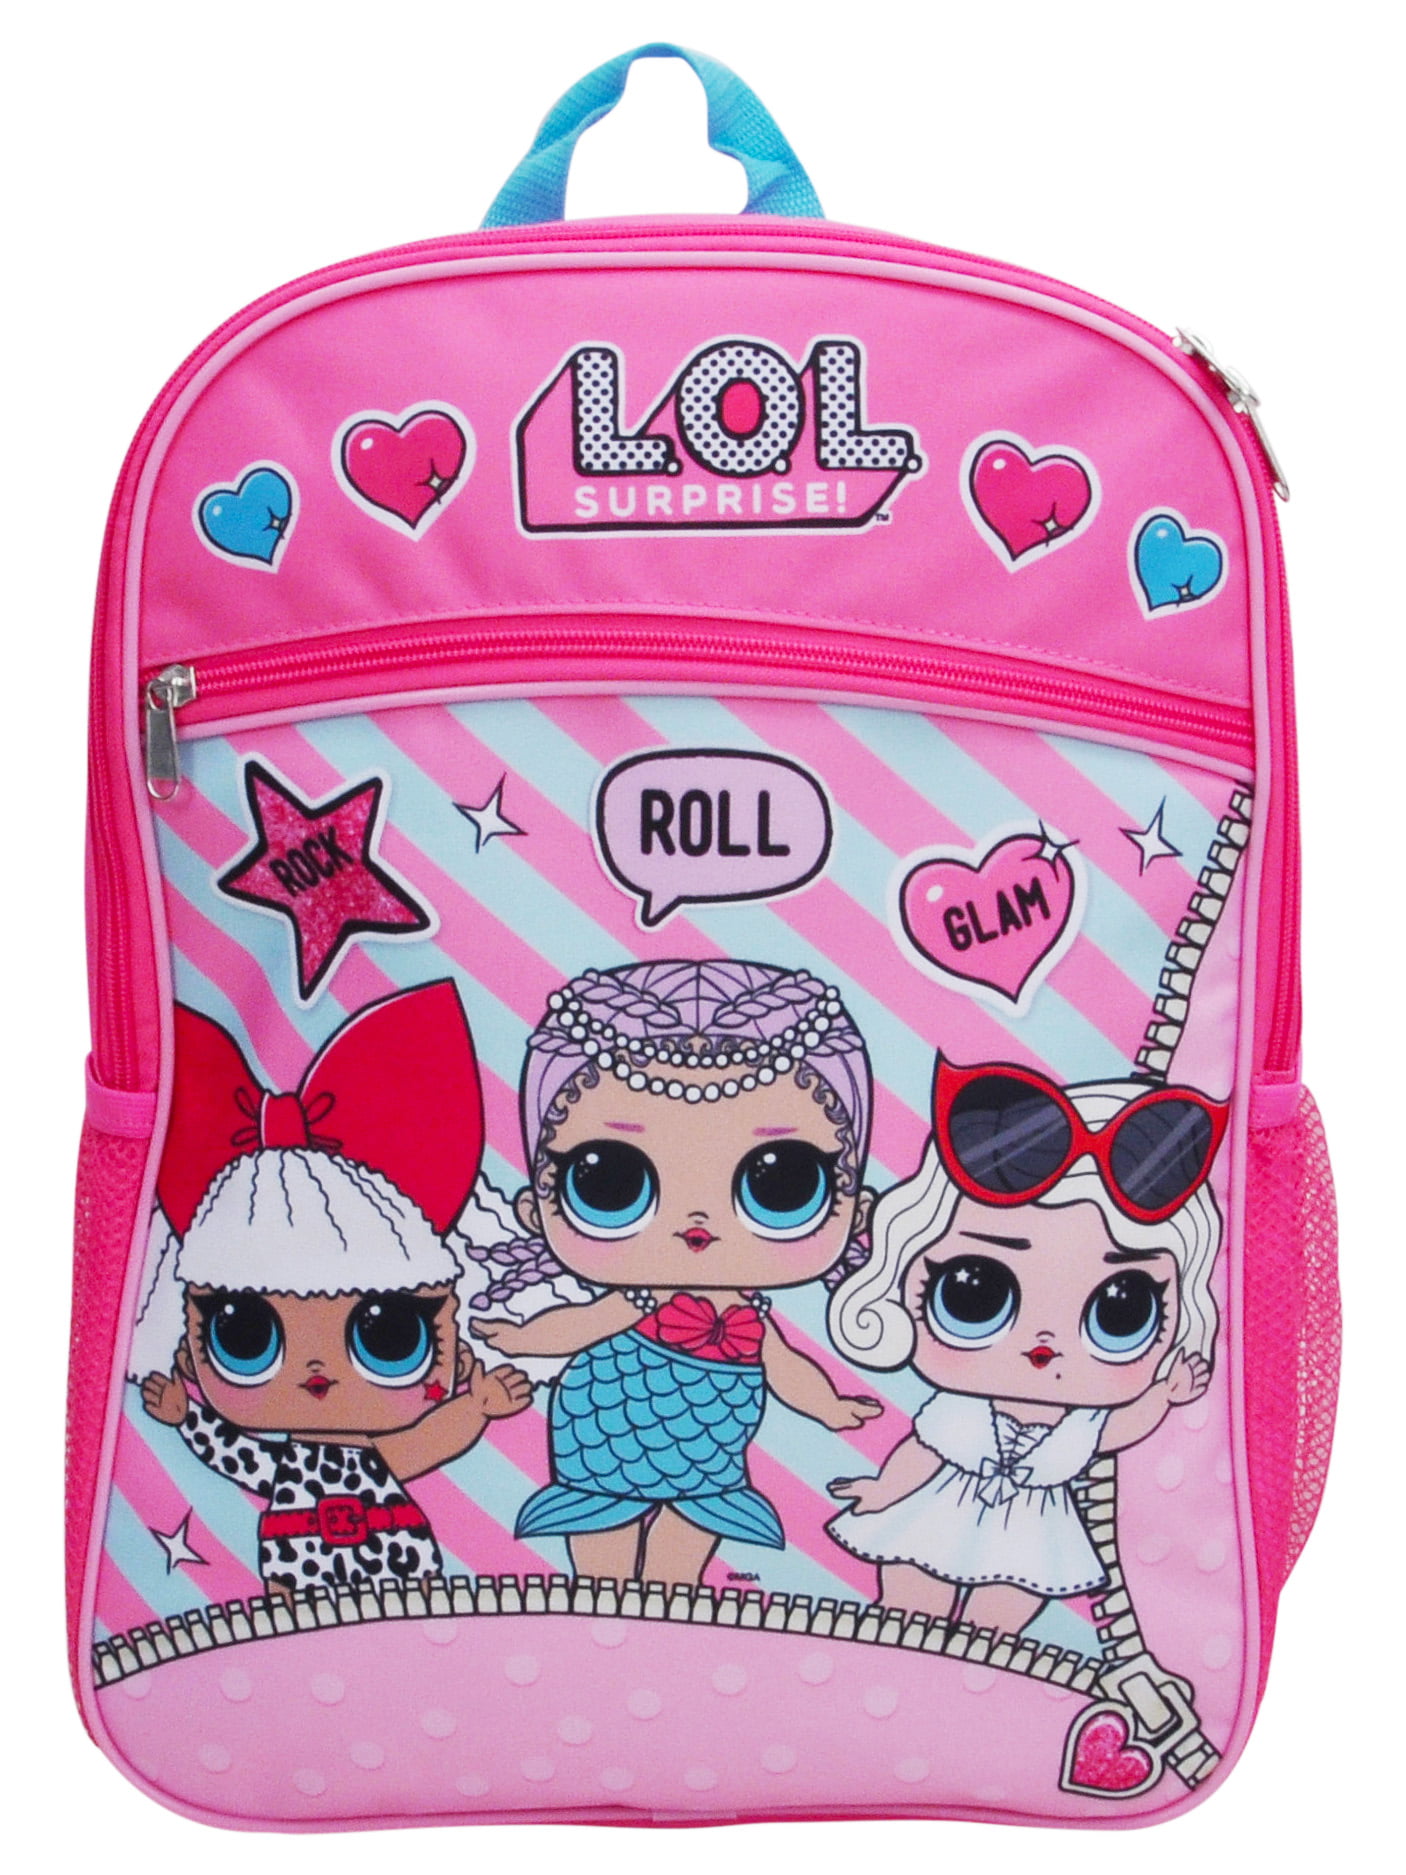 Featuring: Diva Merbaby /& Leading Baby Padded Shoulder Straps LOL Surprise Dolls Rock Roll Glam 16 Backpack with Extra Front Pocket